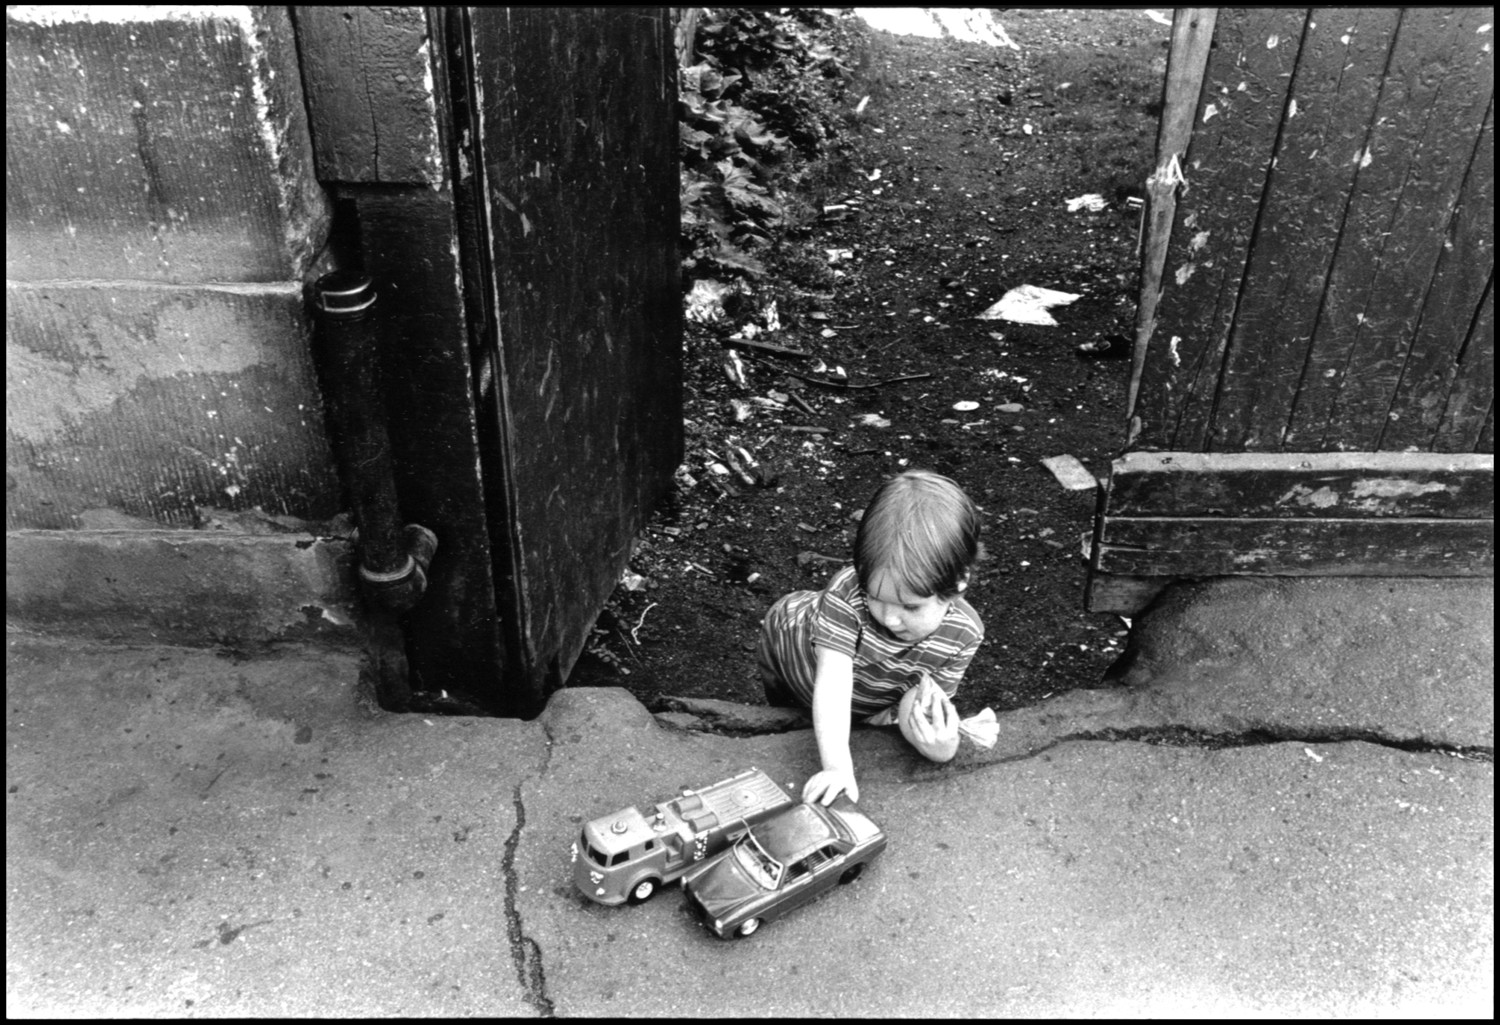 Boy with Toy Cars, South End B&W Photograph (Not Framed)